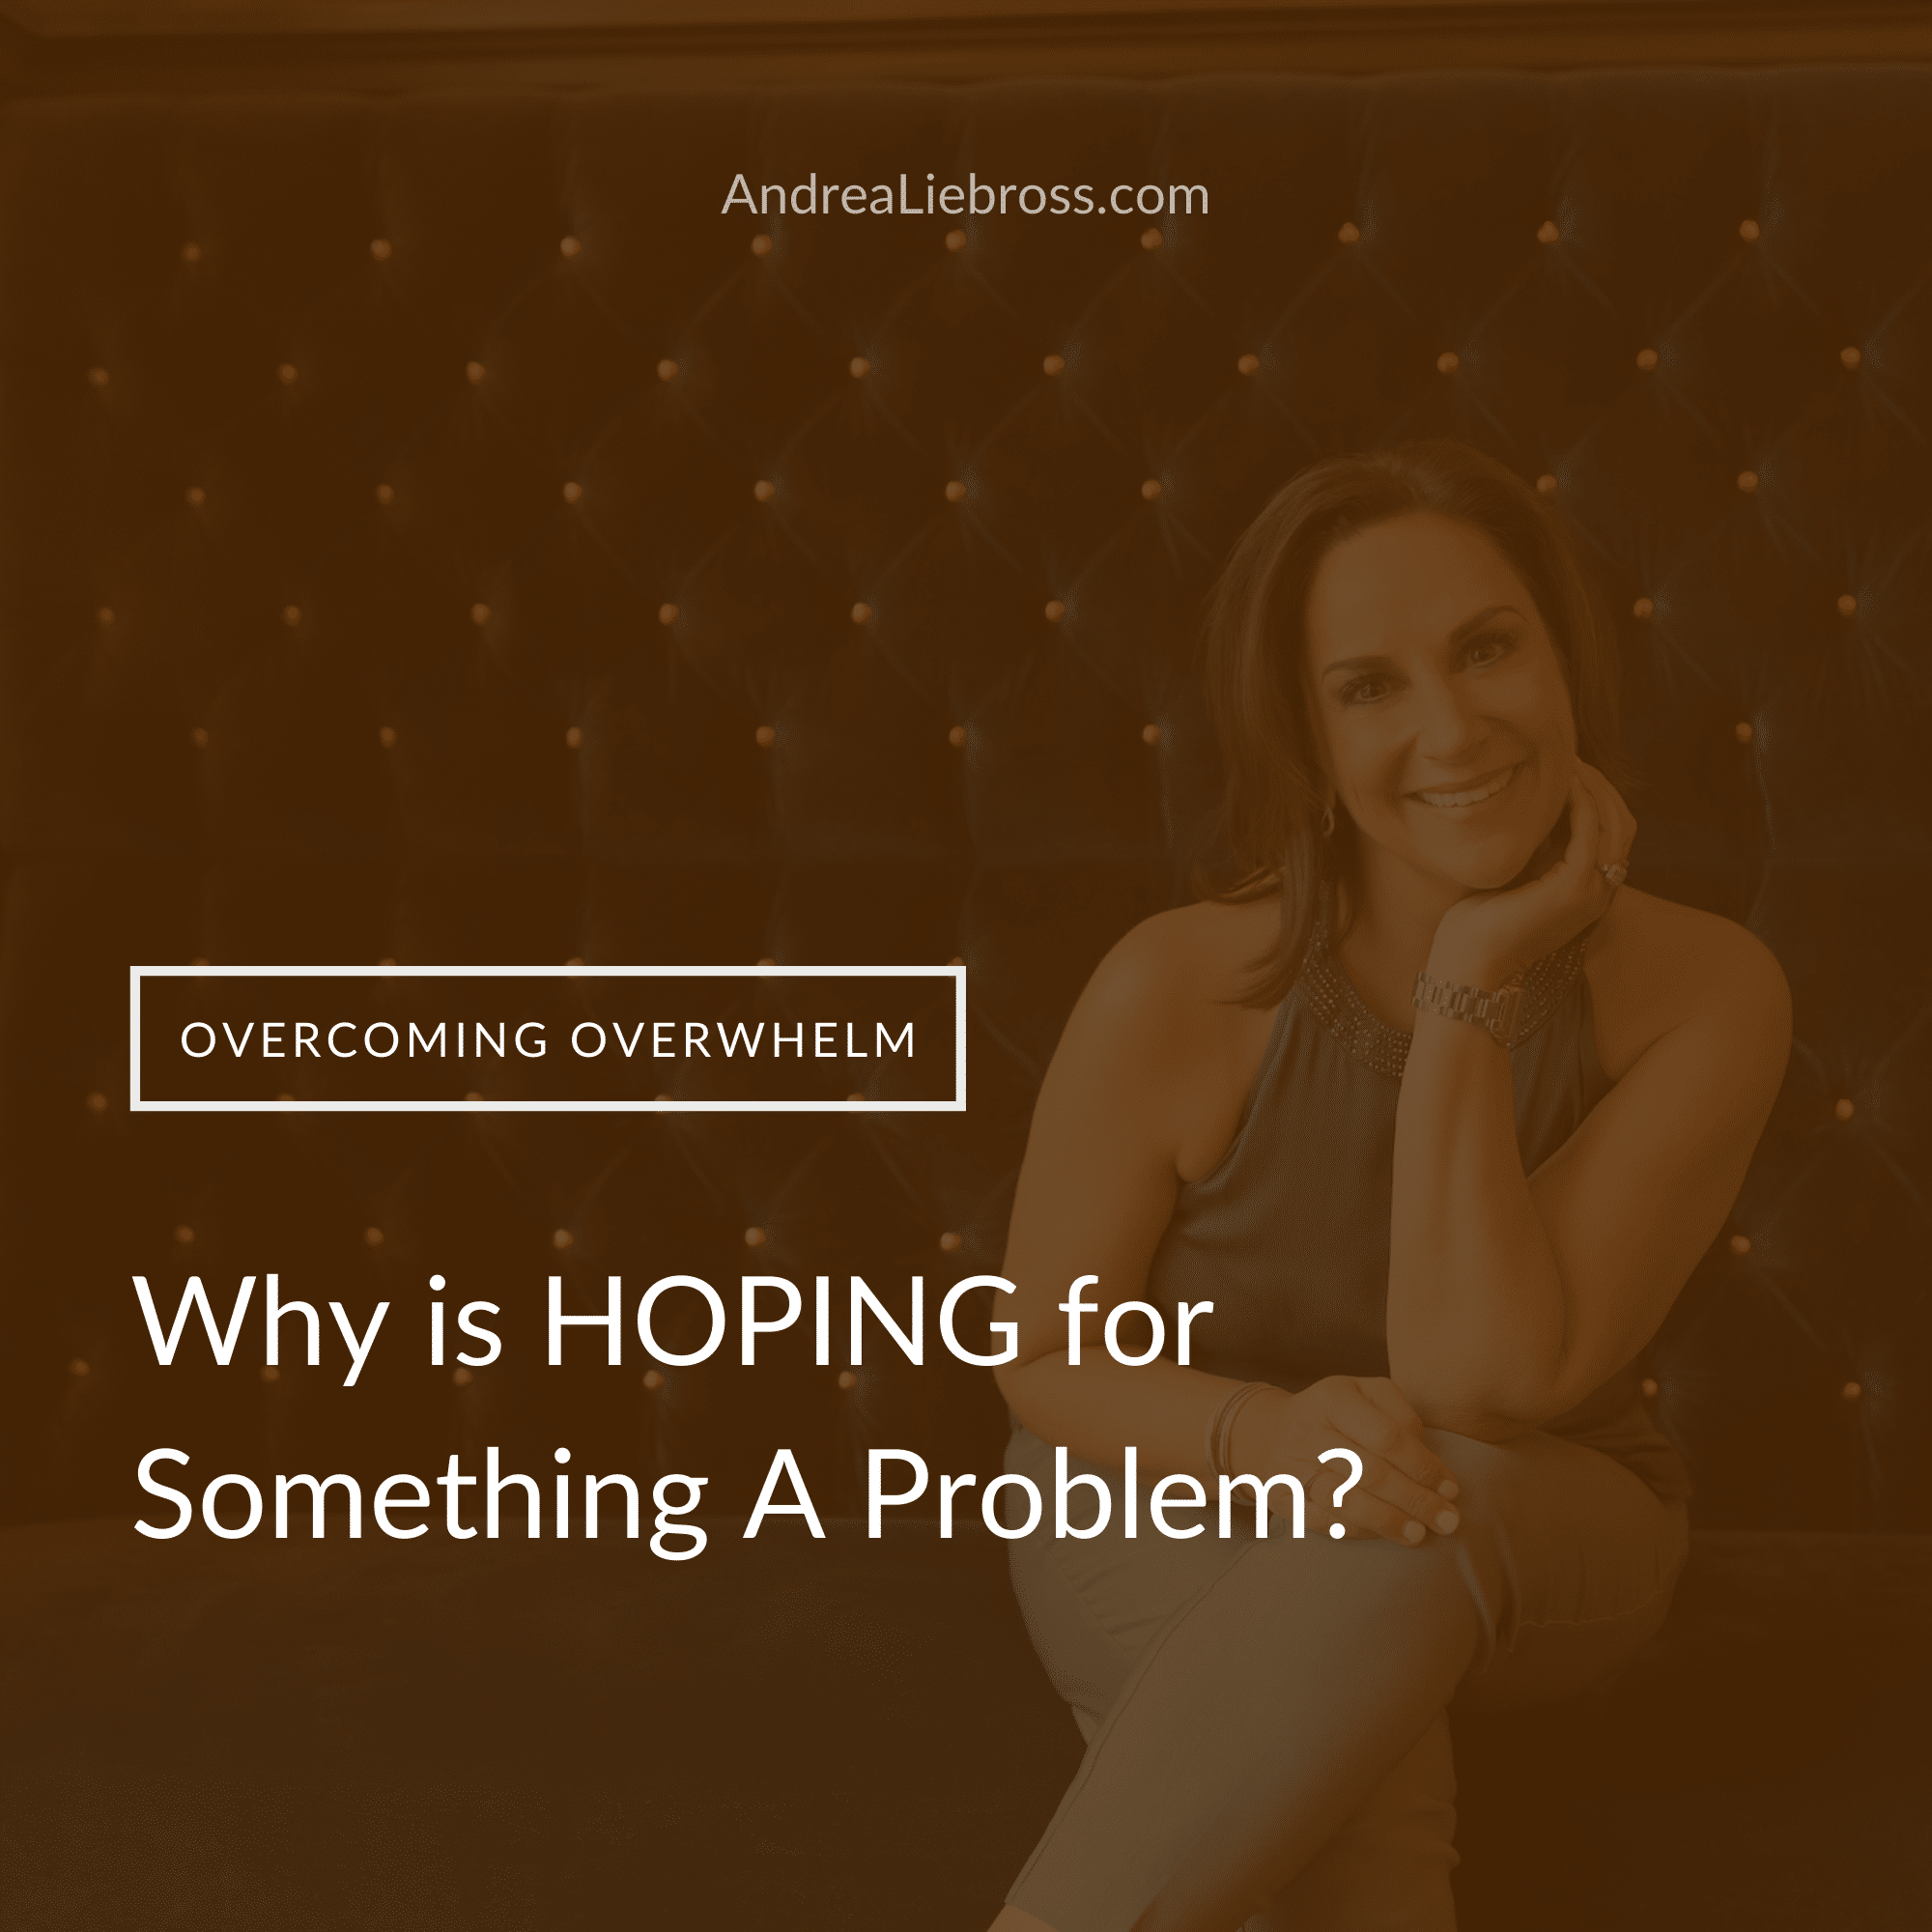 why is hoping for something a problem?